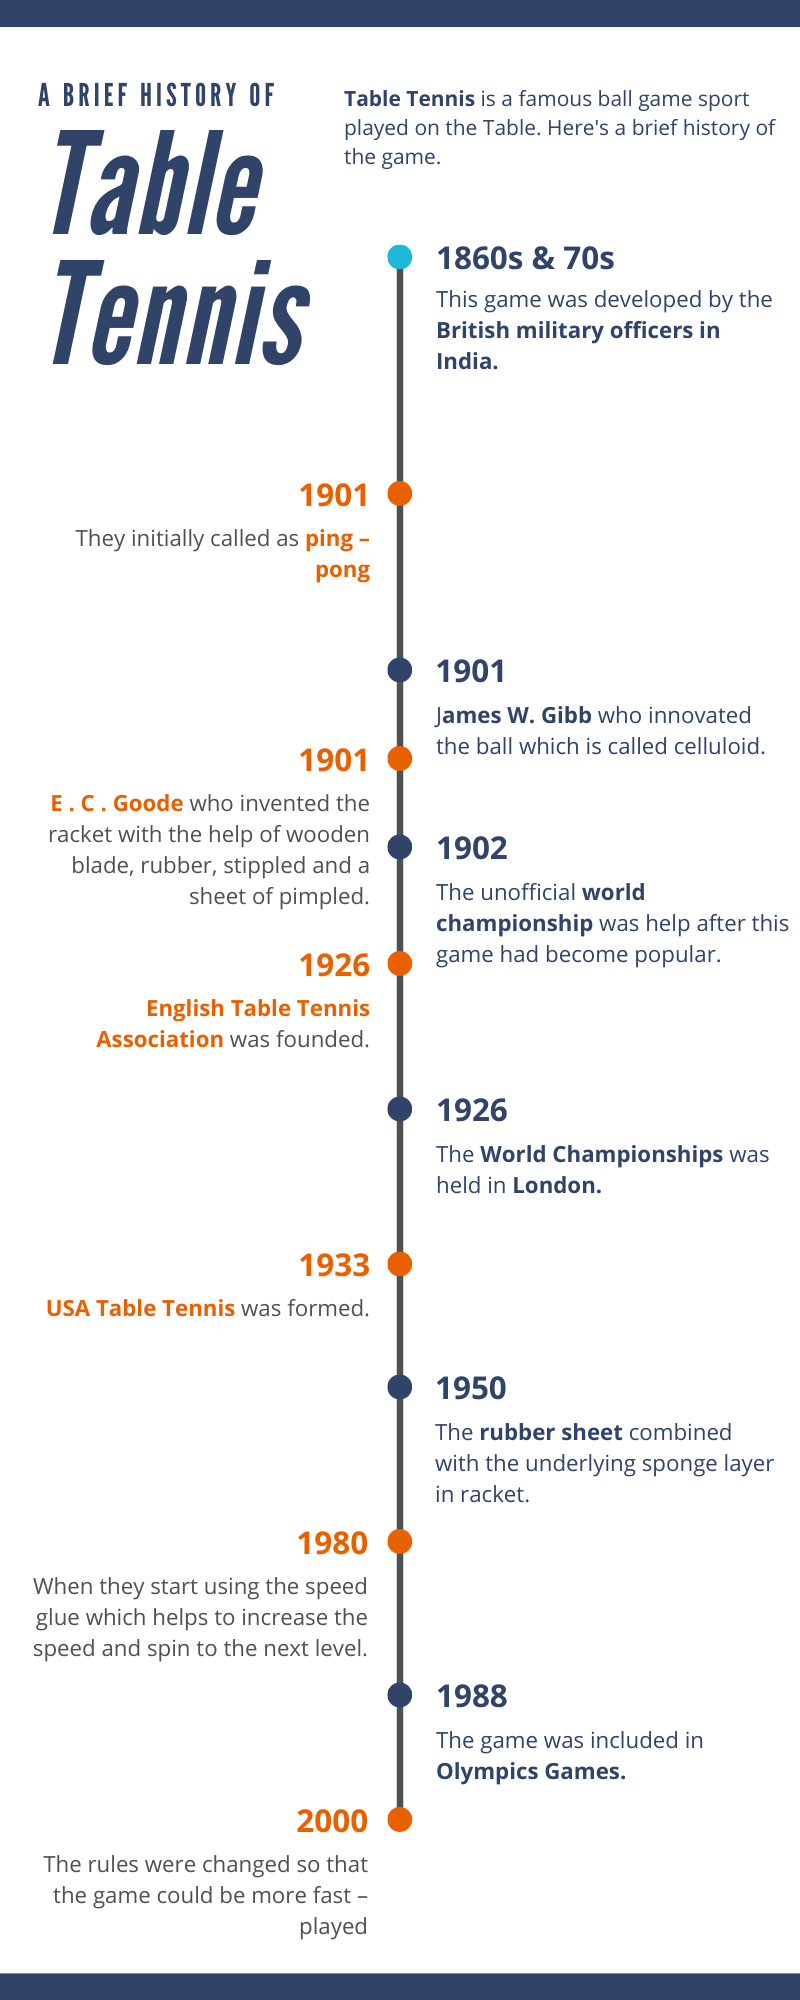 The Brief history of Table Tennis